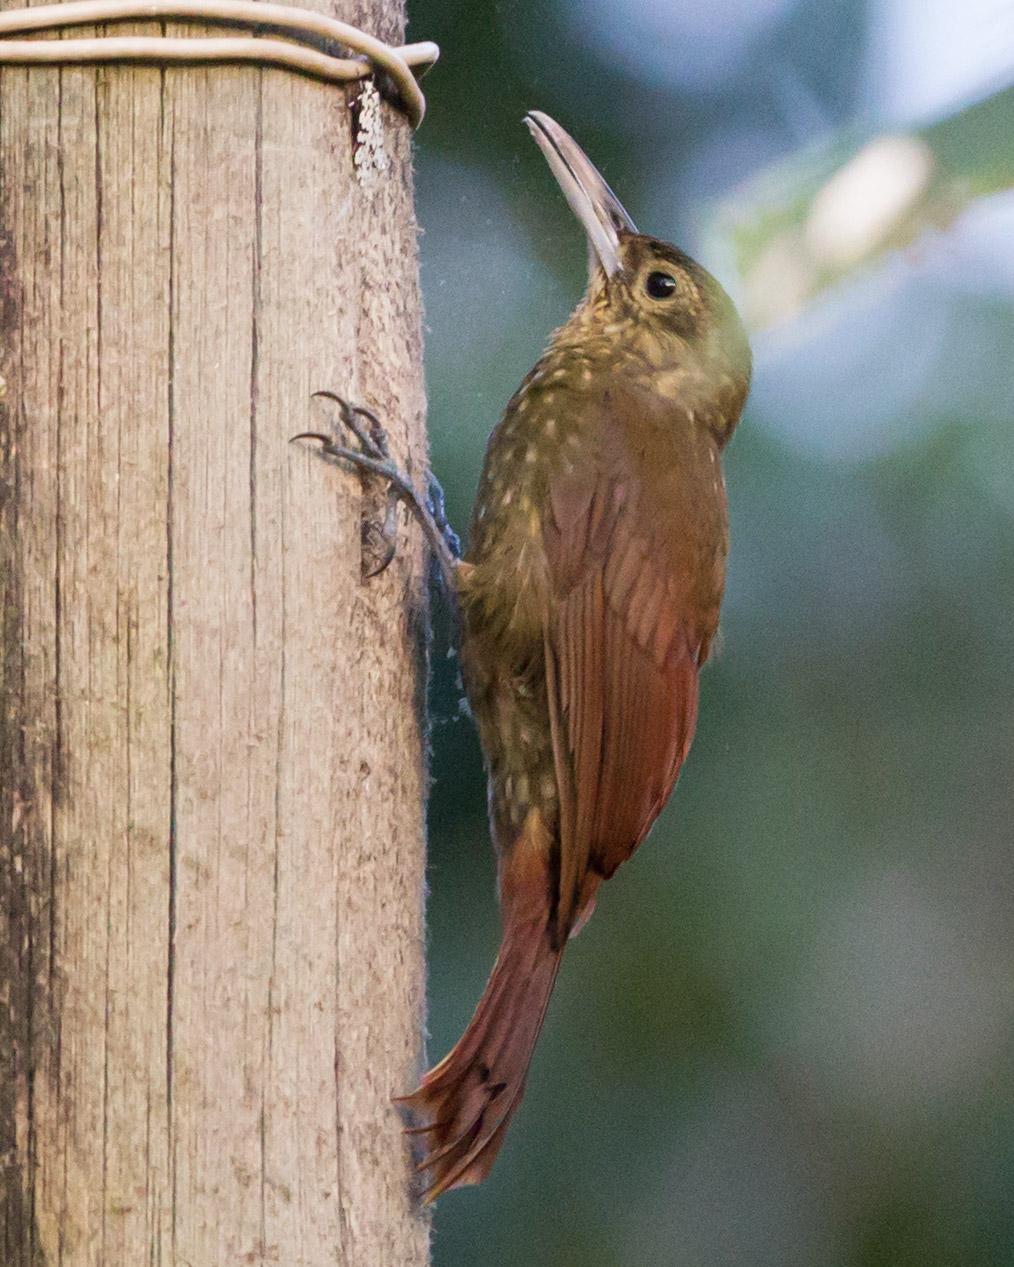 Spotted Woodcreeper Photo by Kevin Berkoff